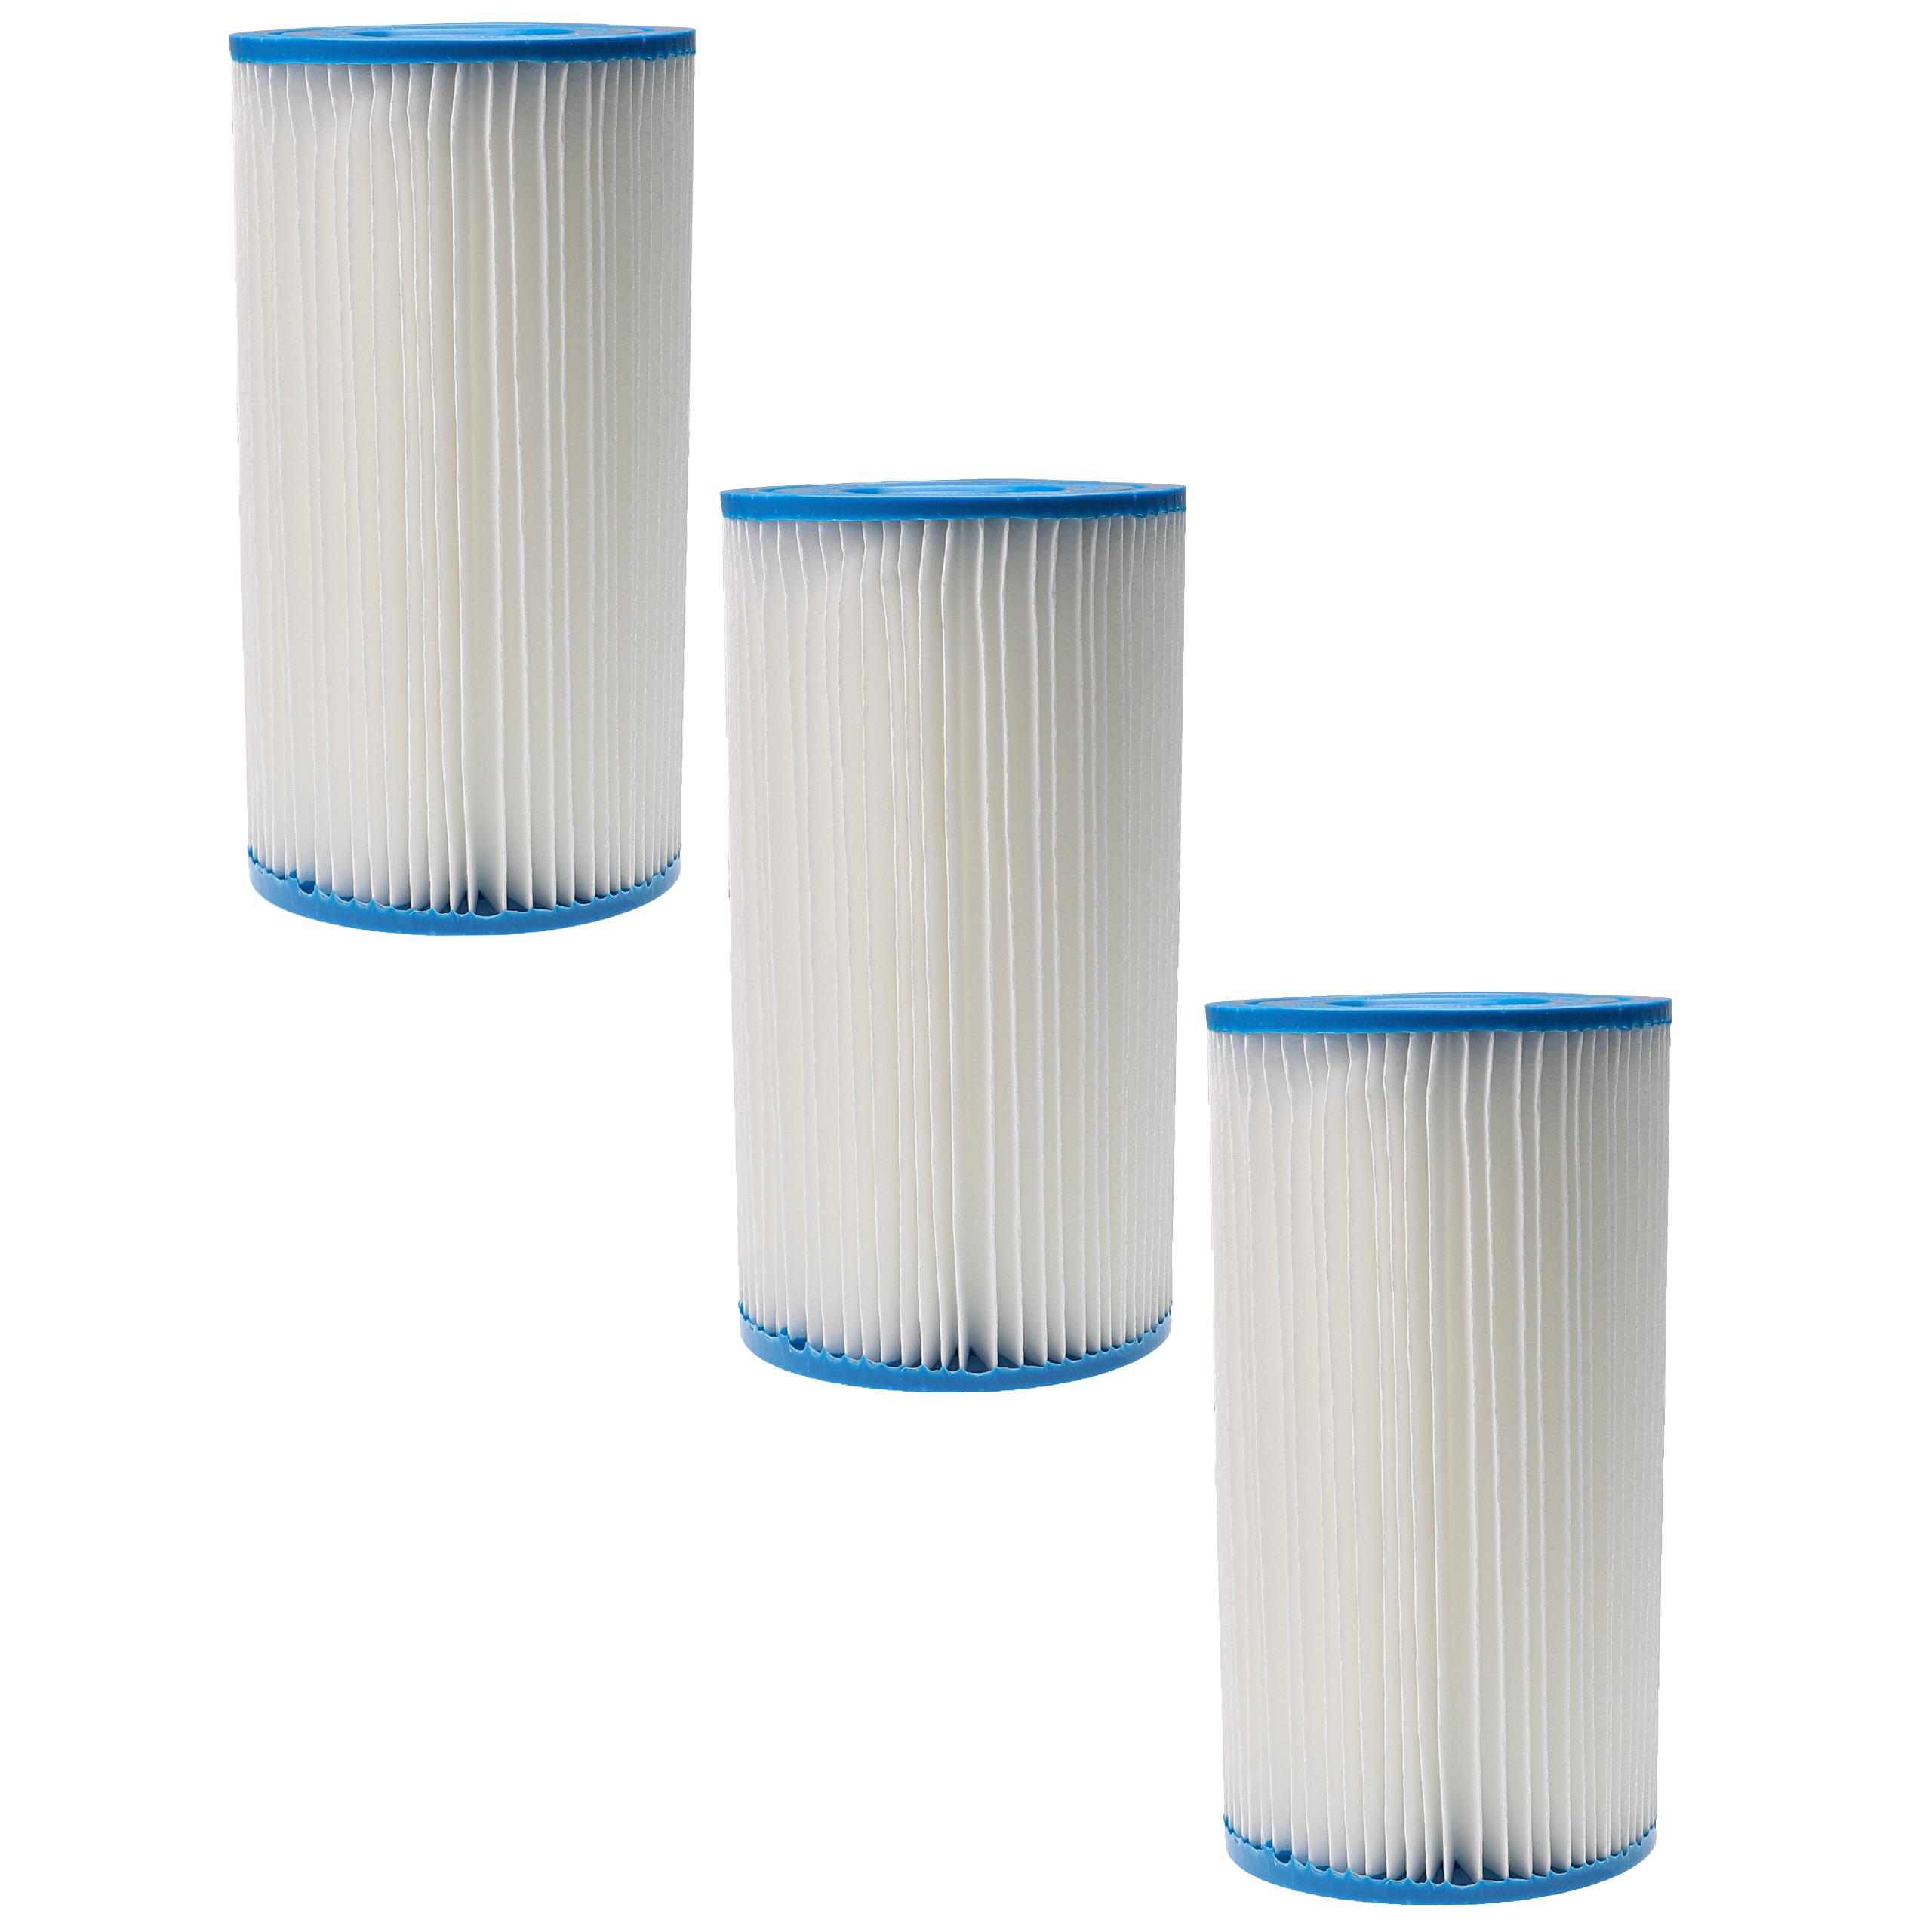  3x Filter Cartridge replaces Intex filter type A for Intex Swimming Pool, Filter Pump - Blue White